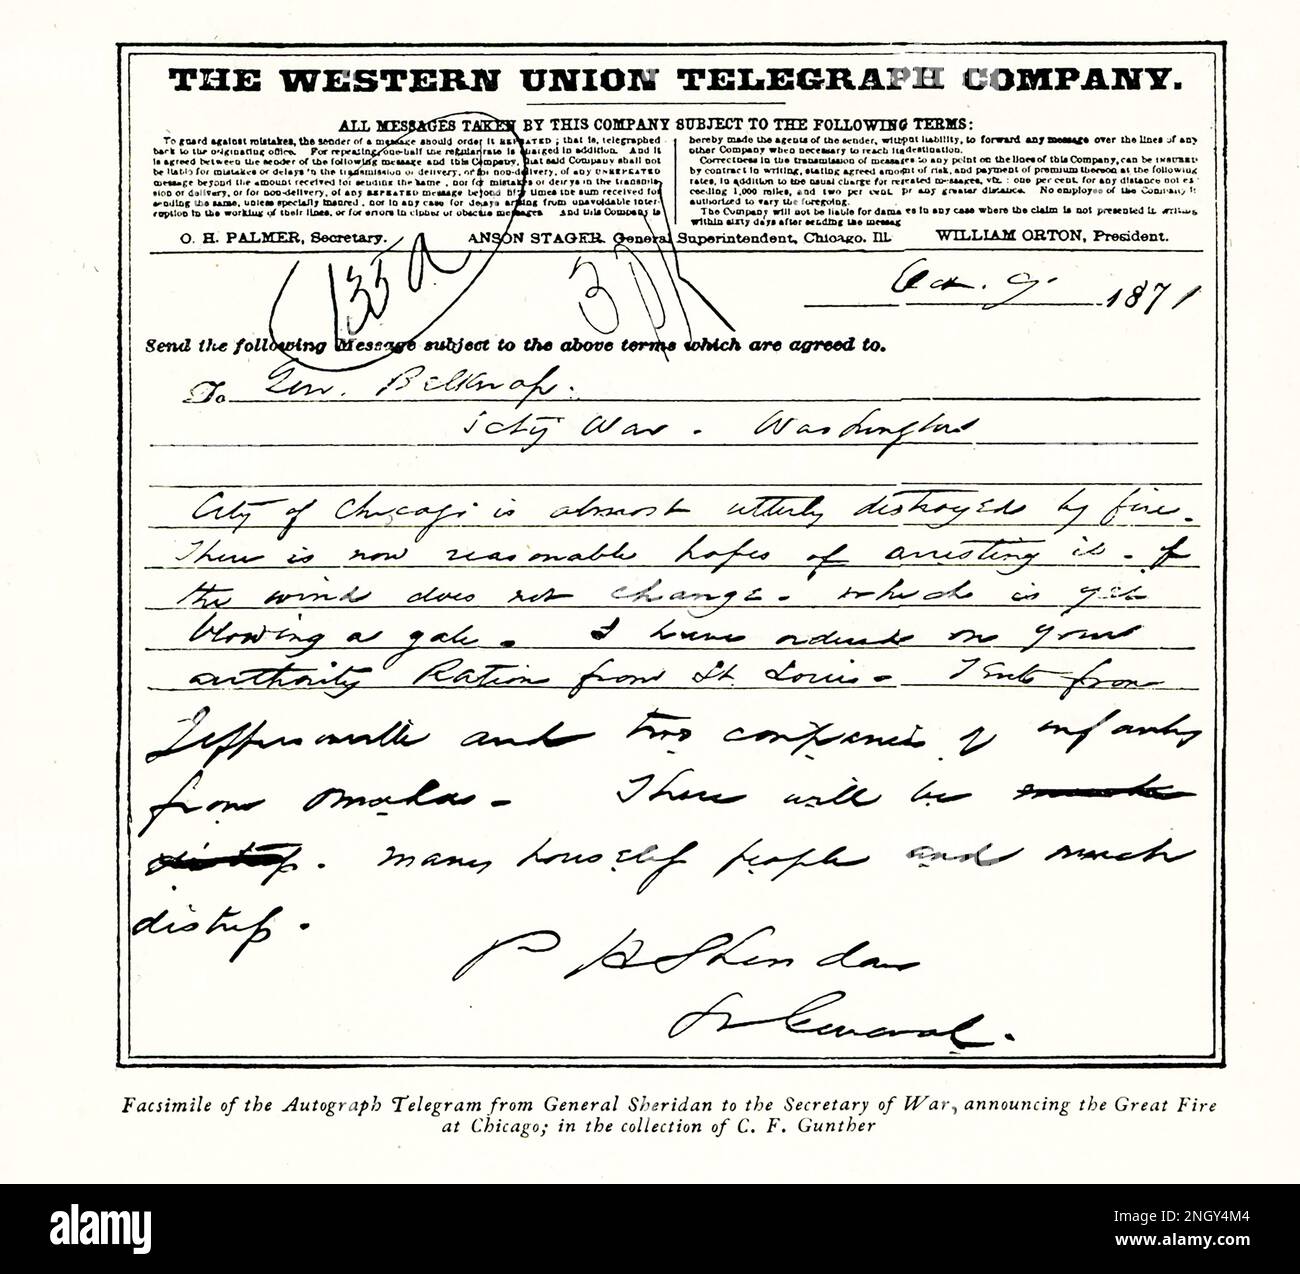 The 1896 caption reads: 'Facsimile of the Autograph Telegram from General Sheridan to Secretary of War announcing the Great Fire at Chicago—in collection of CF Gunther.” The Great Chicago Fire was a conflagration that burned in the American city of Chicago during October 8–10, 1871. Stock Photo